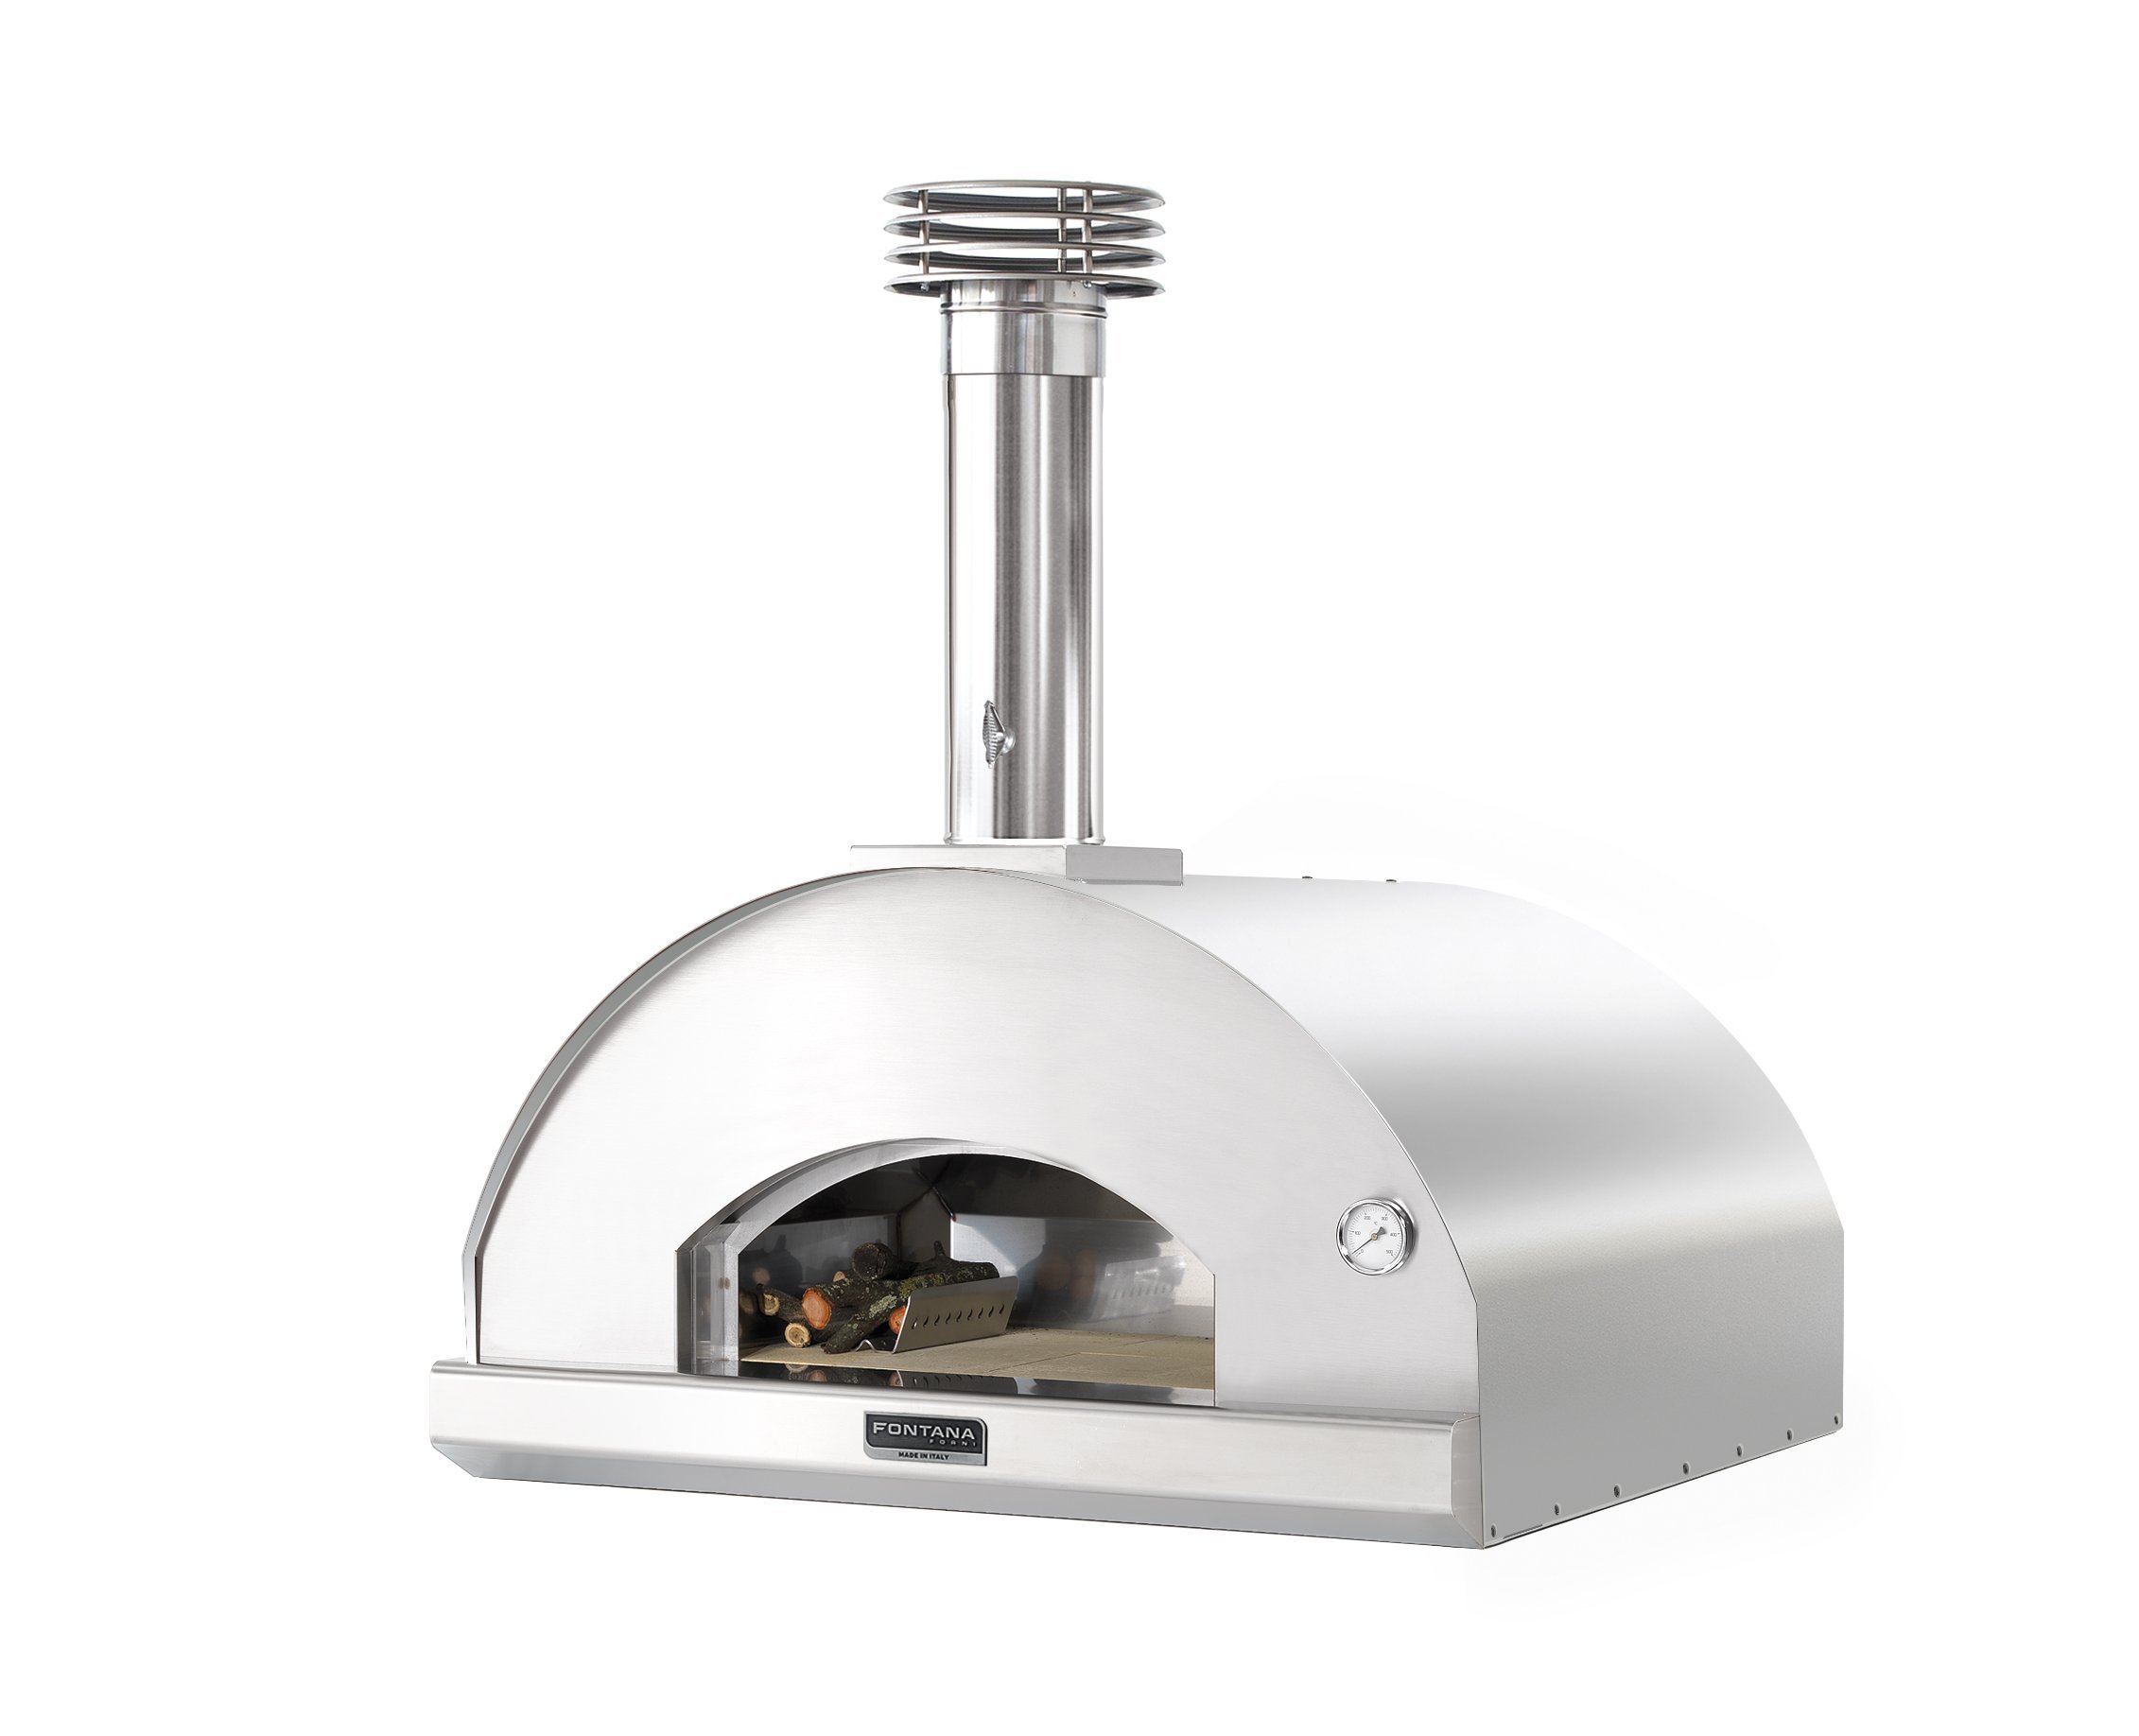 Dome oven Fontana Marinara, stainless steel pizza oven with wood firing, inox